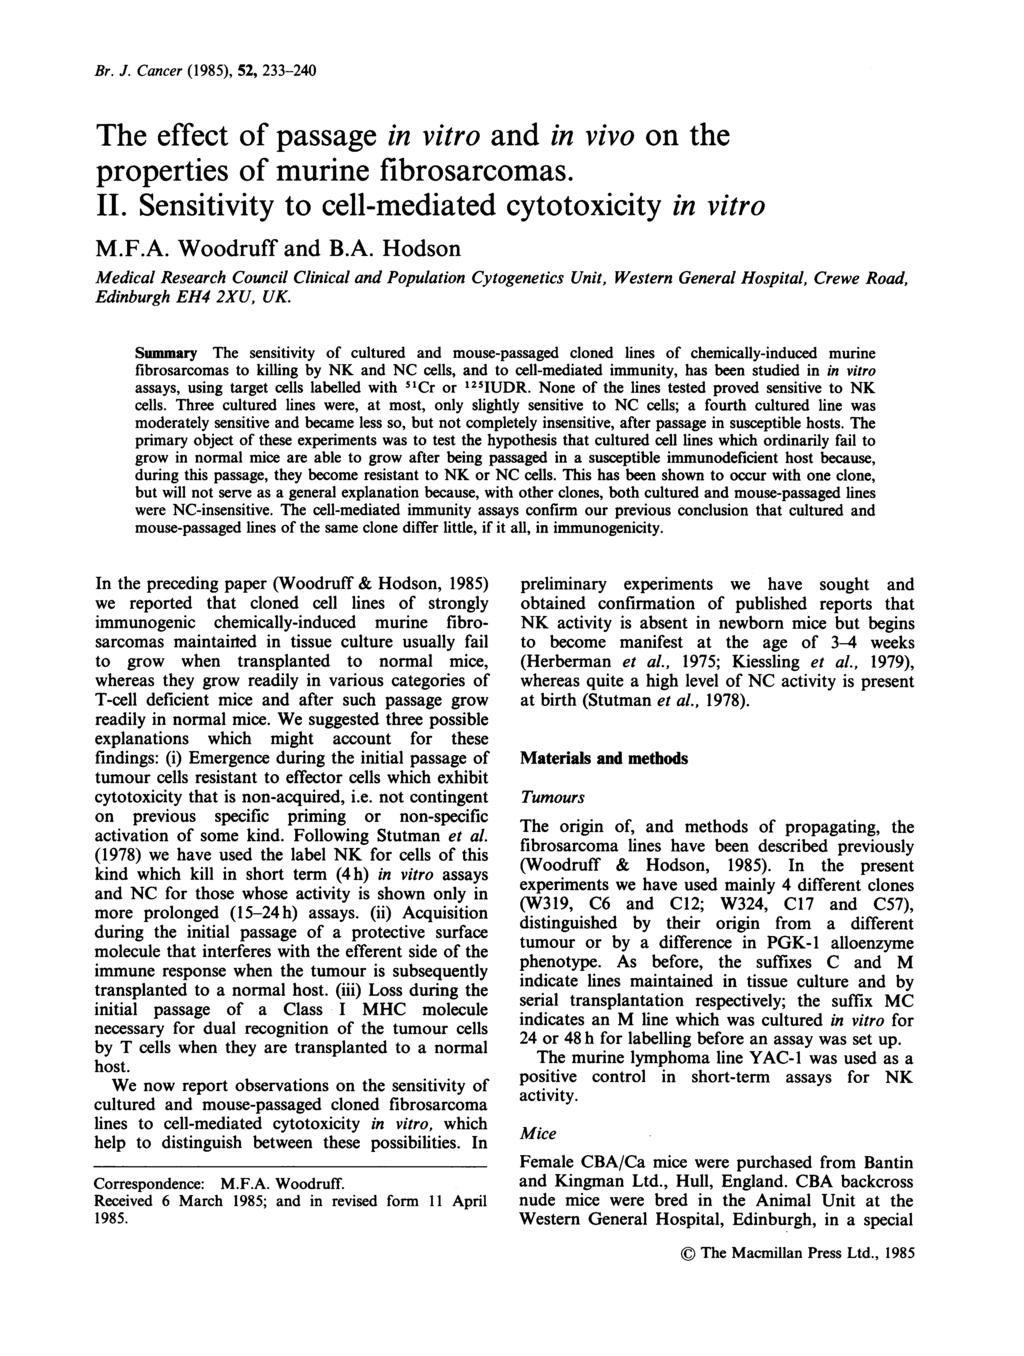 Br. J. Cancer (1985), 52, 233-24 The effect of passage in vitro and in vivo on the properties of murine fibrosarcomas. II. Sensitivity to cell-mediated cytotoxicity in vitro M.F.A.